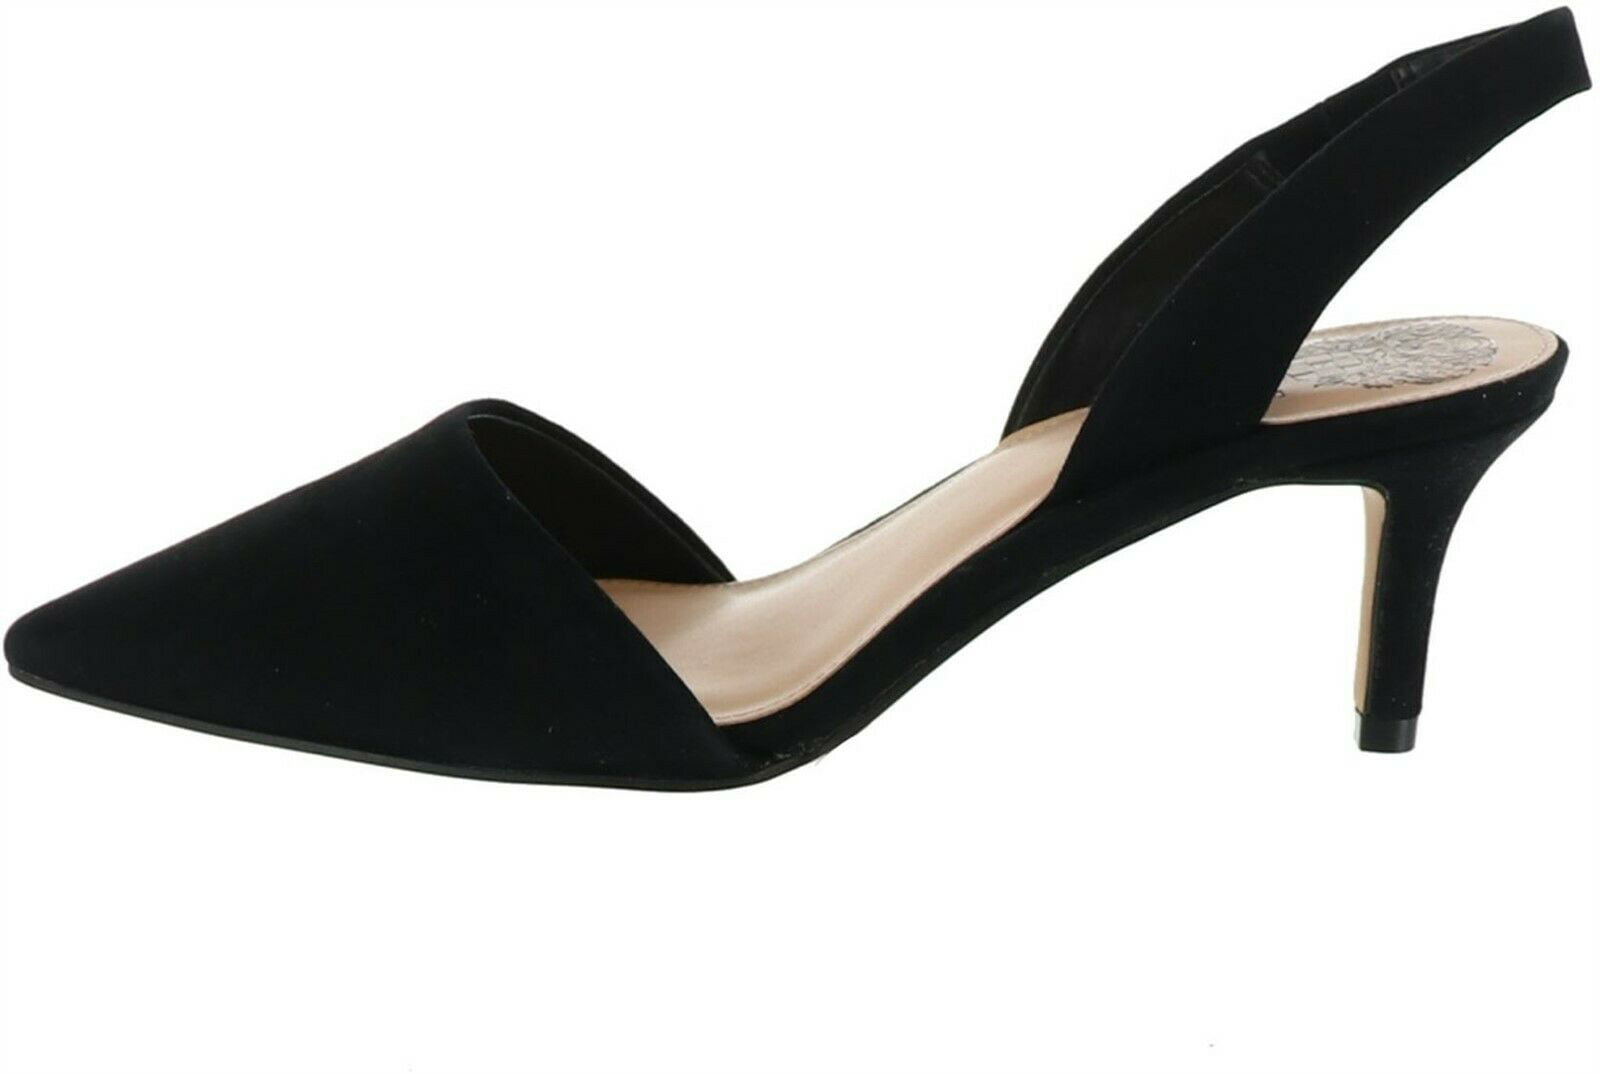 Vince Camuto Leather Suede Slingback 